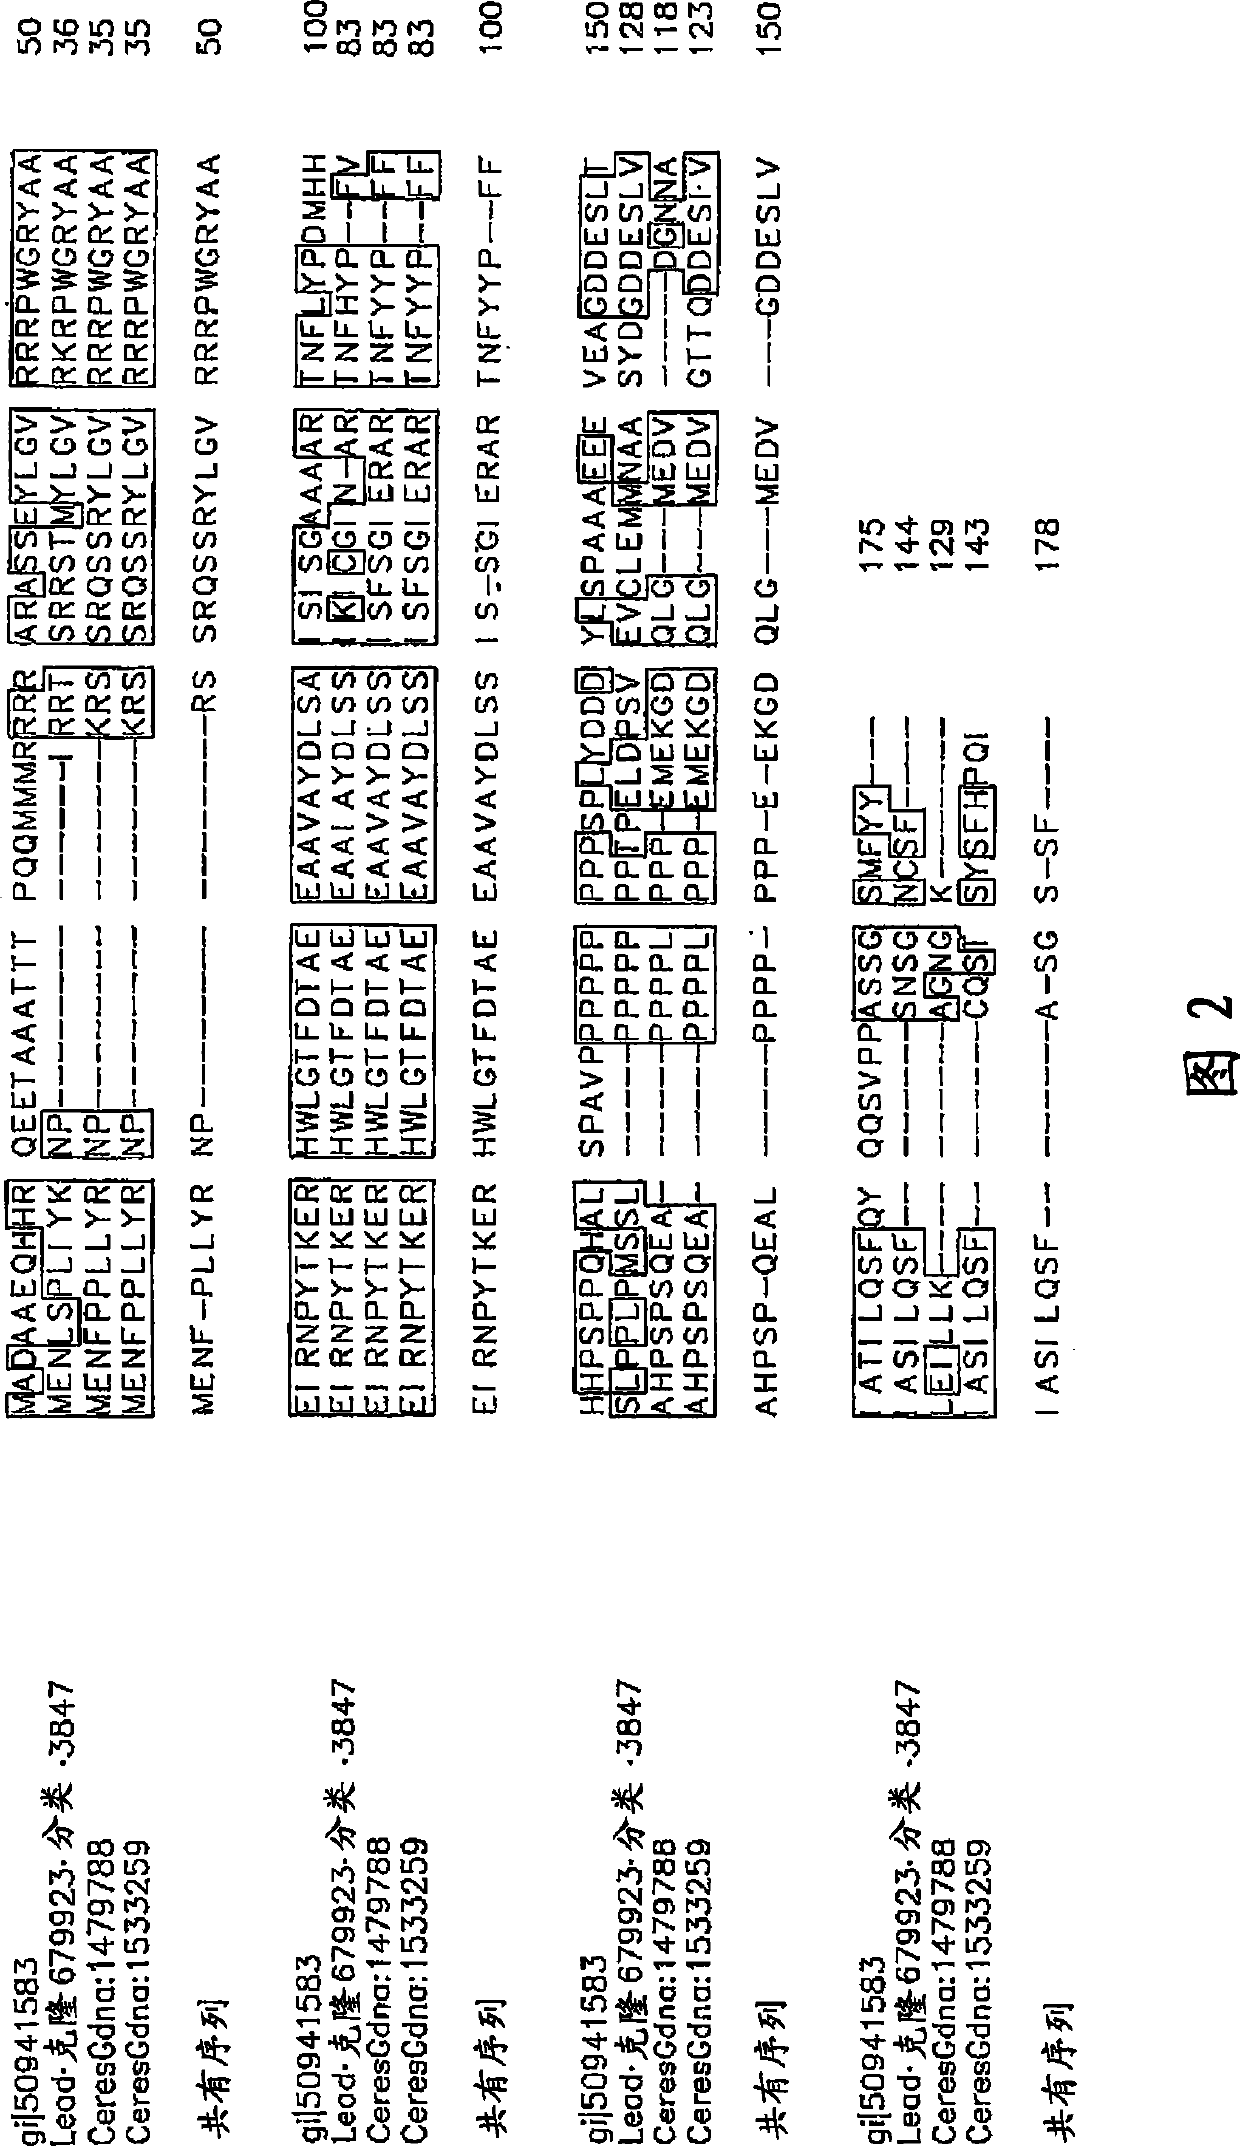 Nucleotide sequence and corresponding polypeptide for endowing plant with adjusted growth velocity and biomass